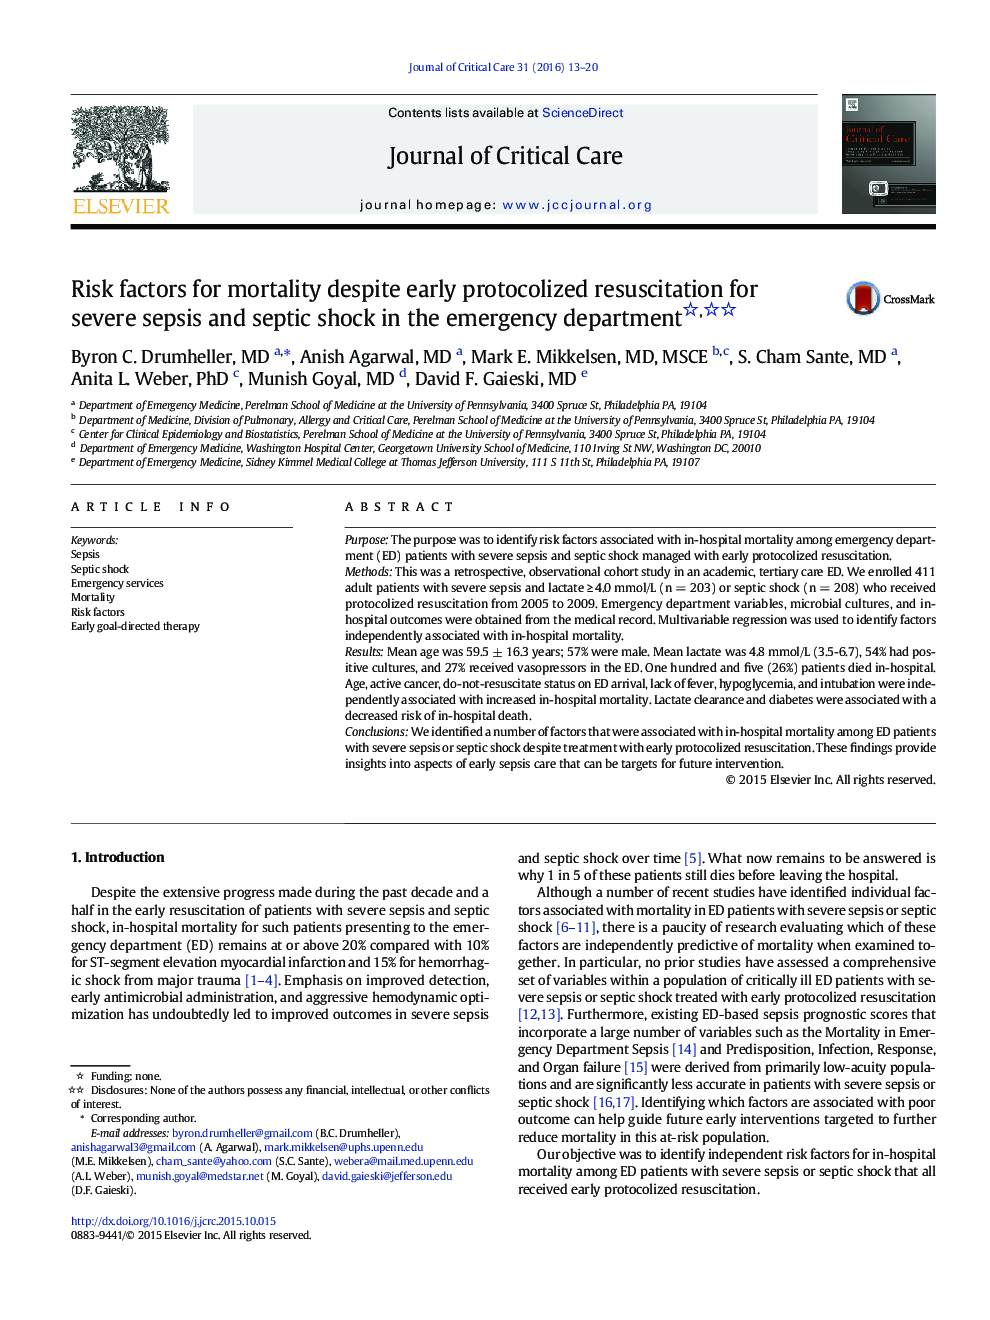 Predictors/OutcomesRisk factors for mortality despite early protocolized resuscitation for severe sepsis and septic shock in the emergency department